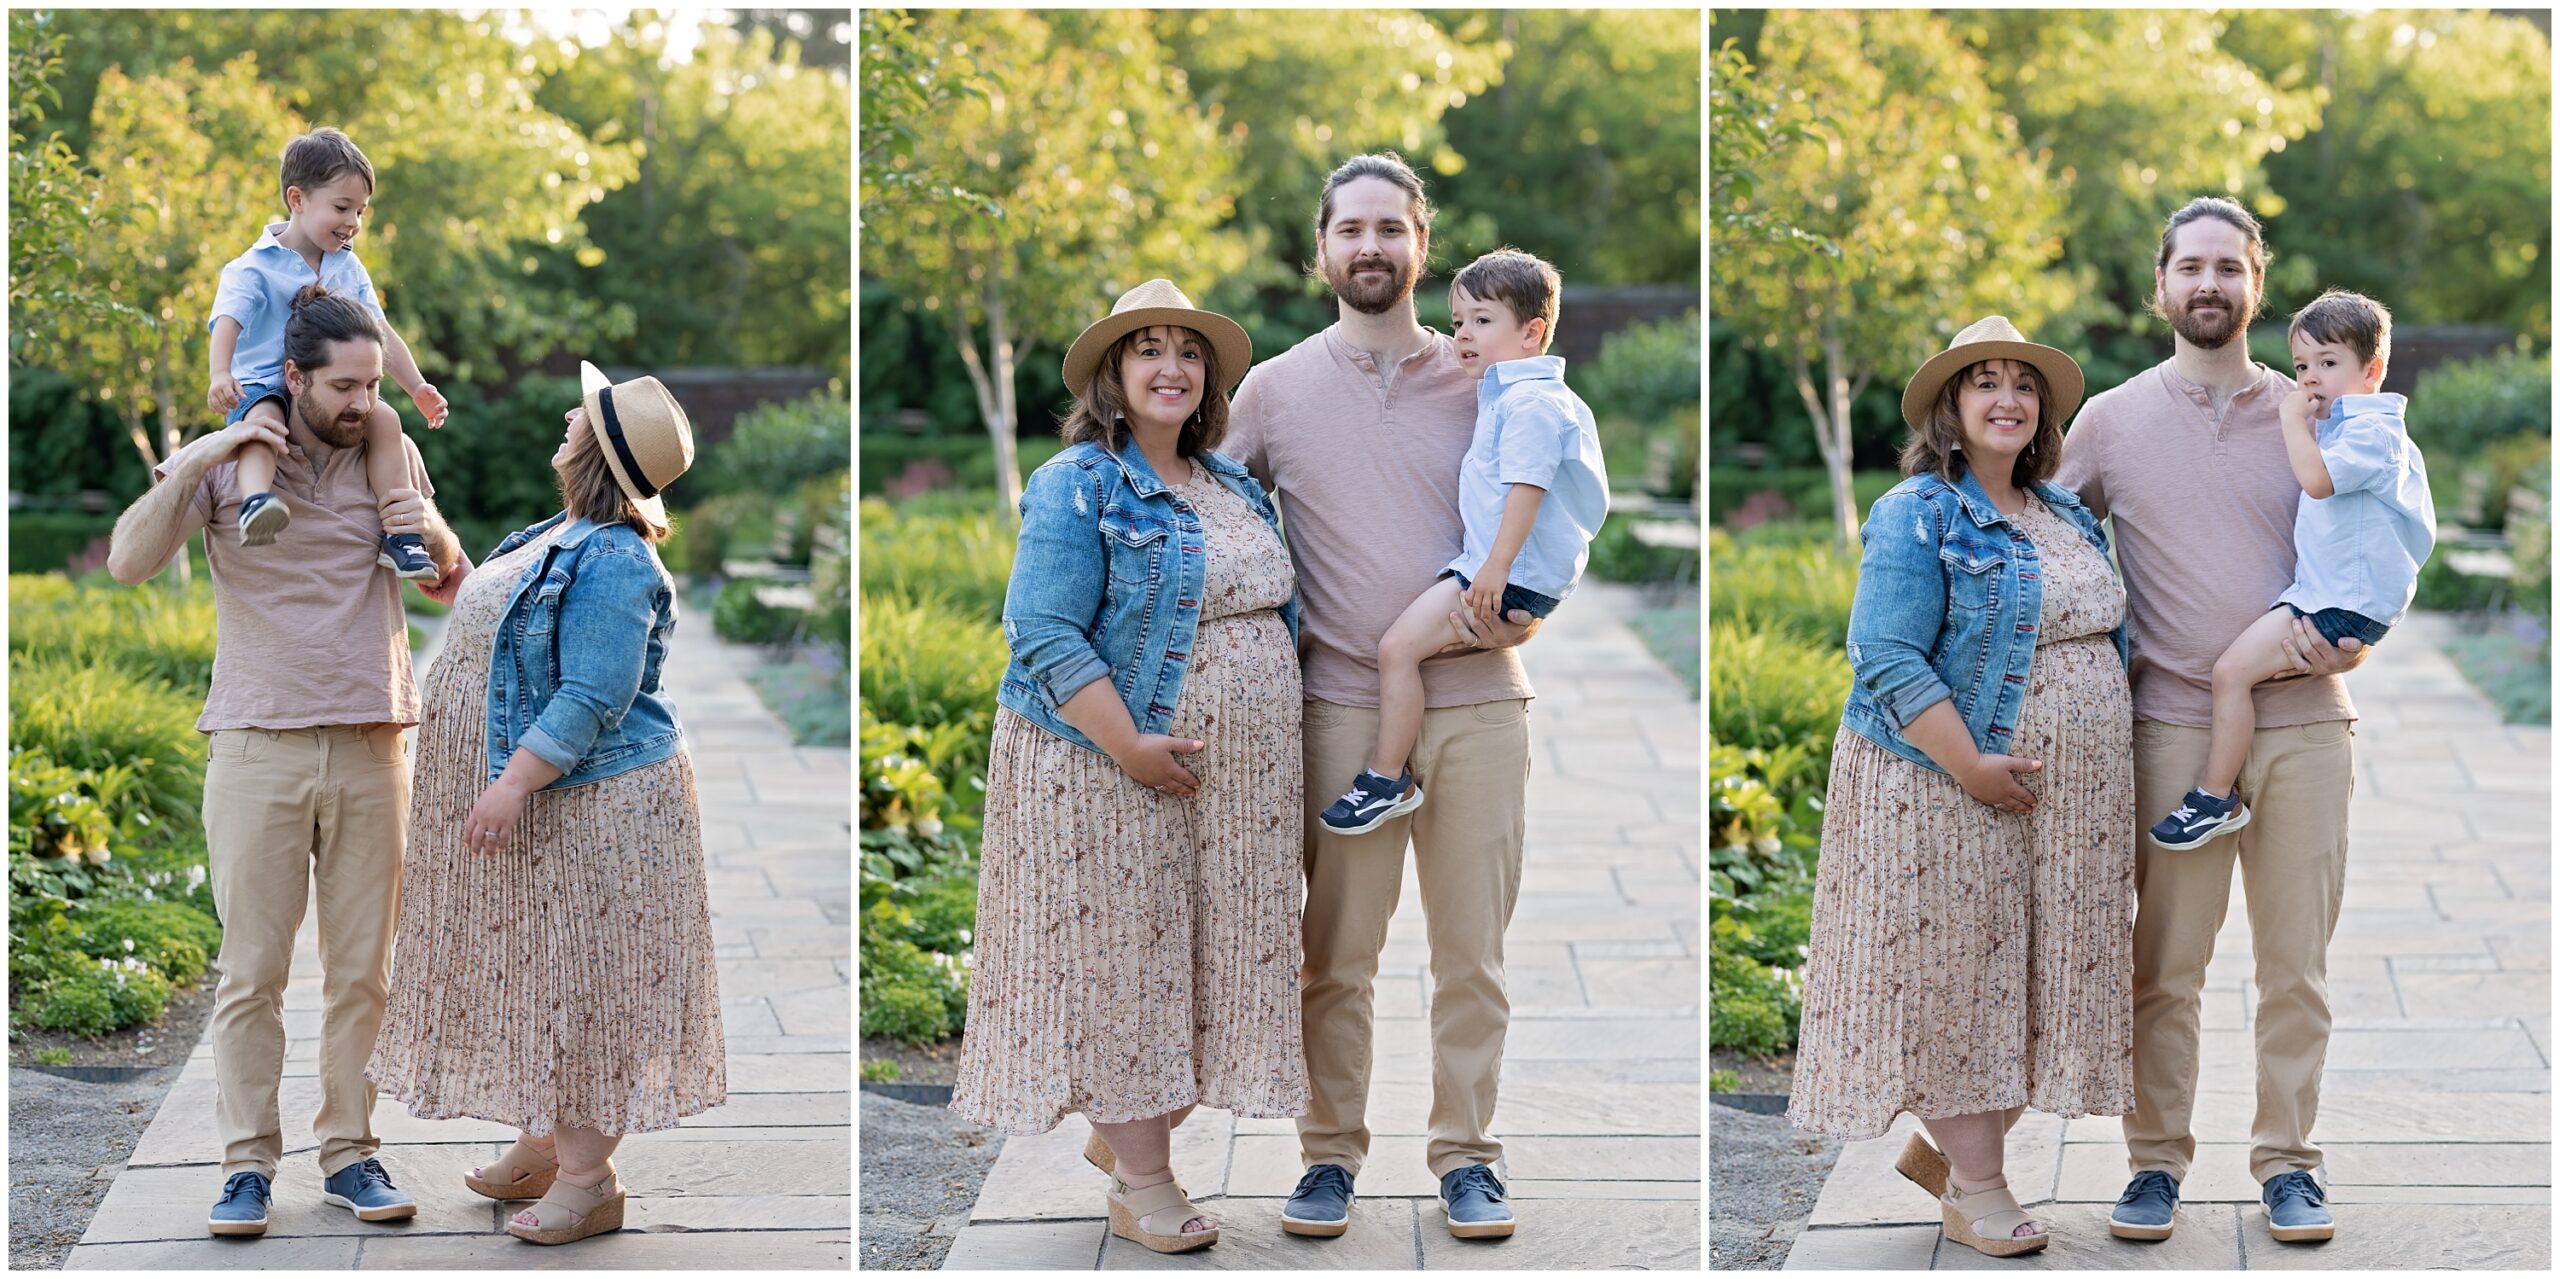 Mellon Park Family Maternity Session in Pittsburgh PA Photographed by Pittsburgh Maternity Photographer Acevedo Weddings